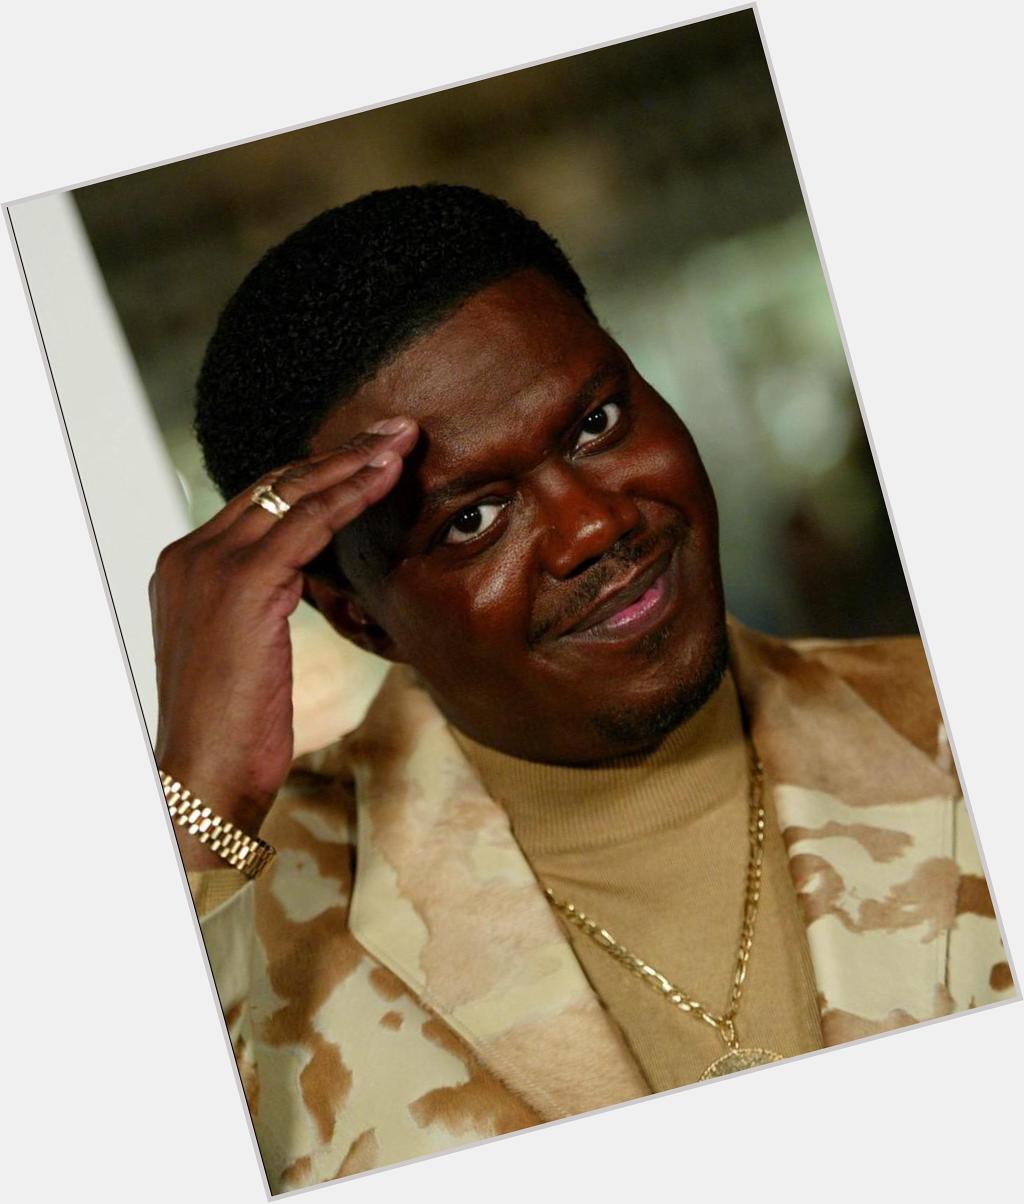 Happy birthday and RIP to the legend Bernie Mac. I must be so funny because I share a birthday with him 